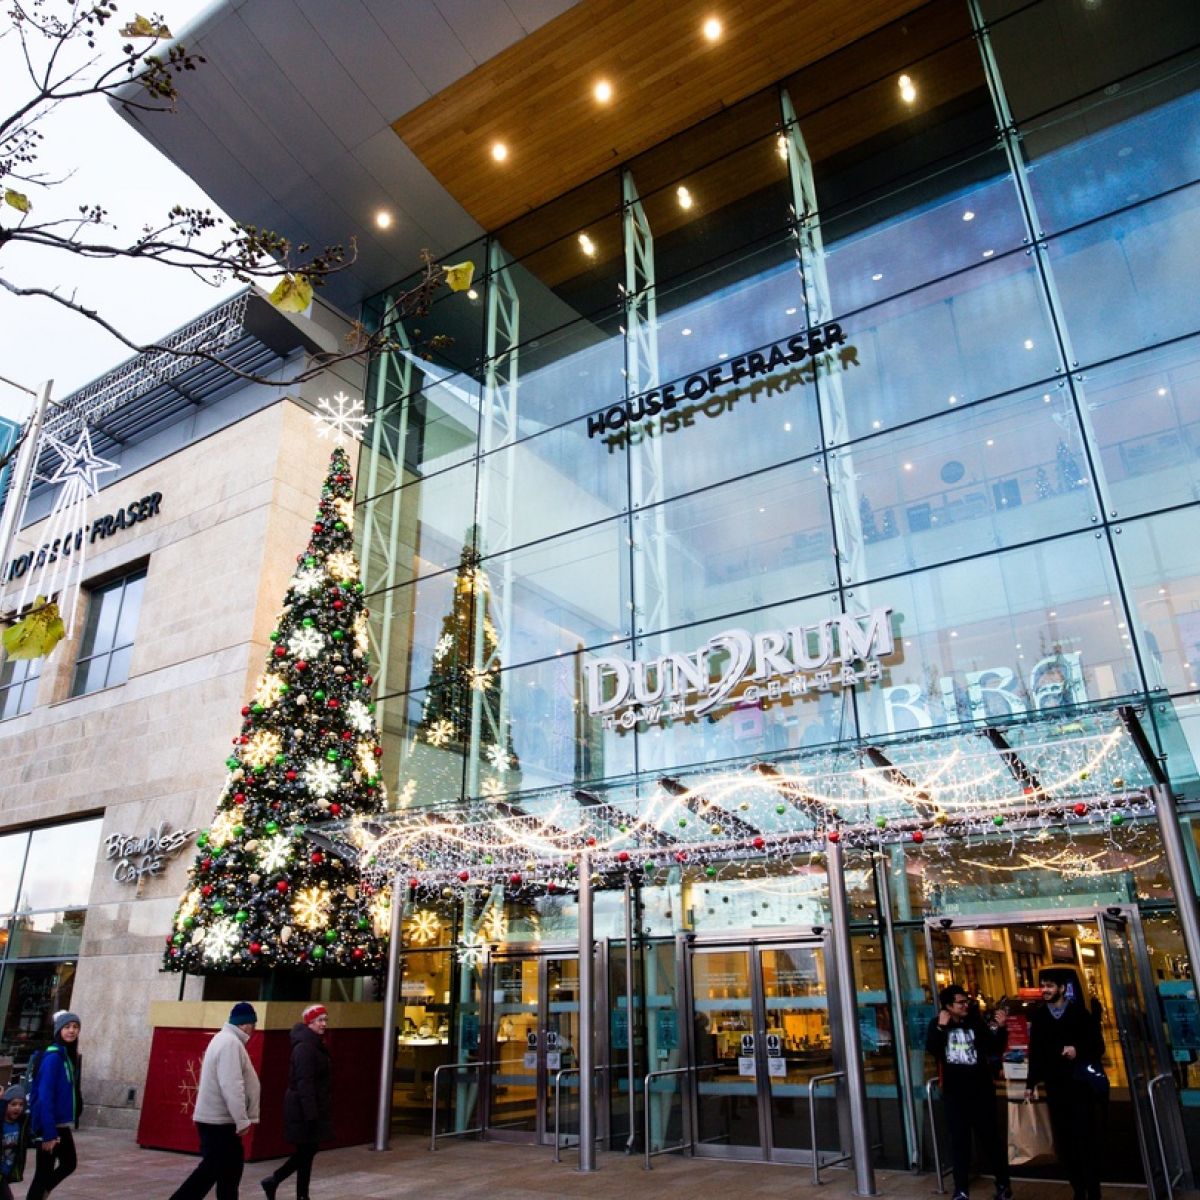 Brown Thomas to open major new shop in Dundrum